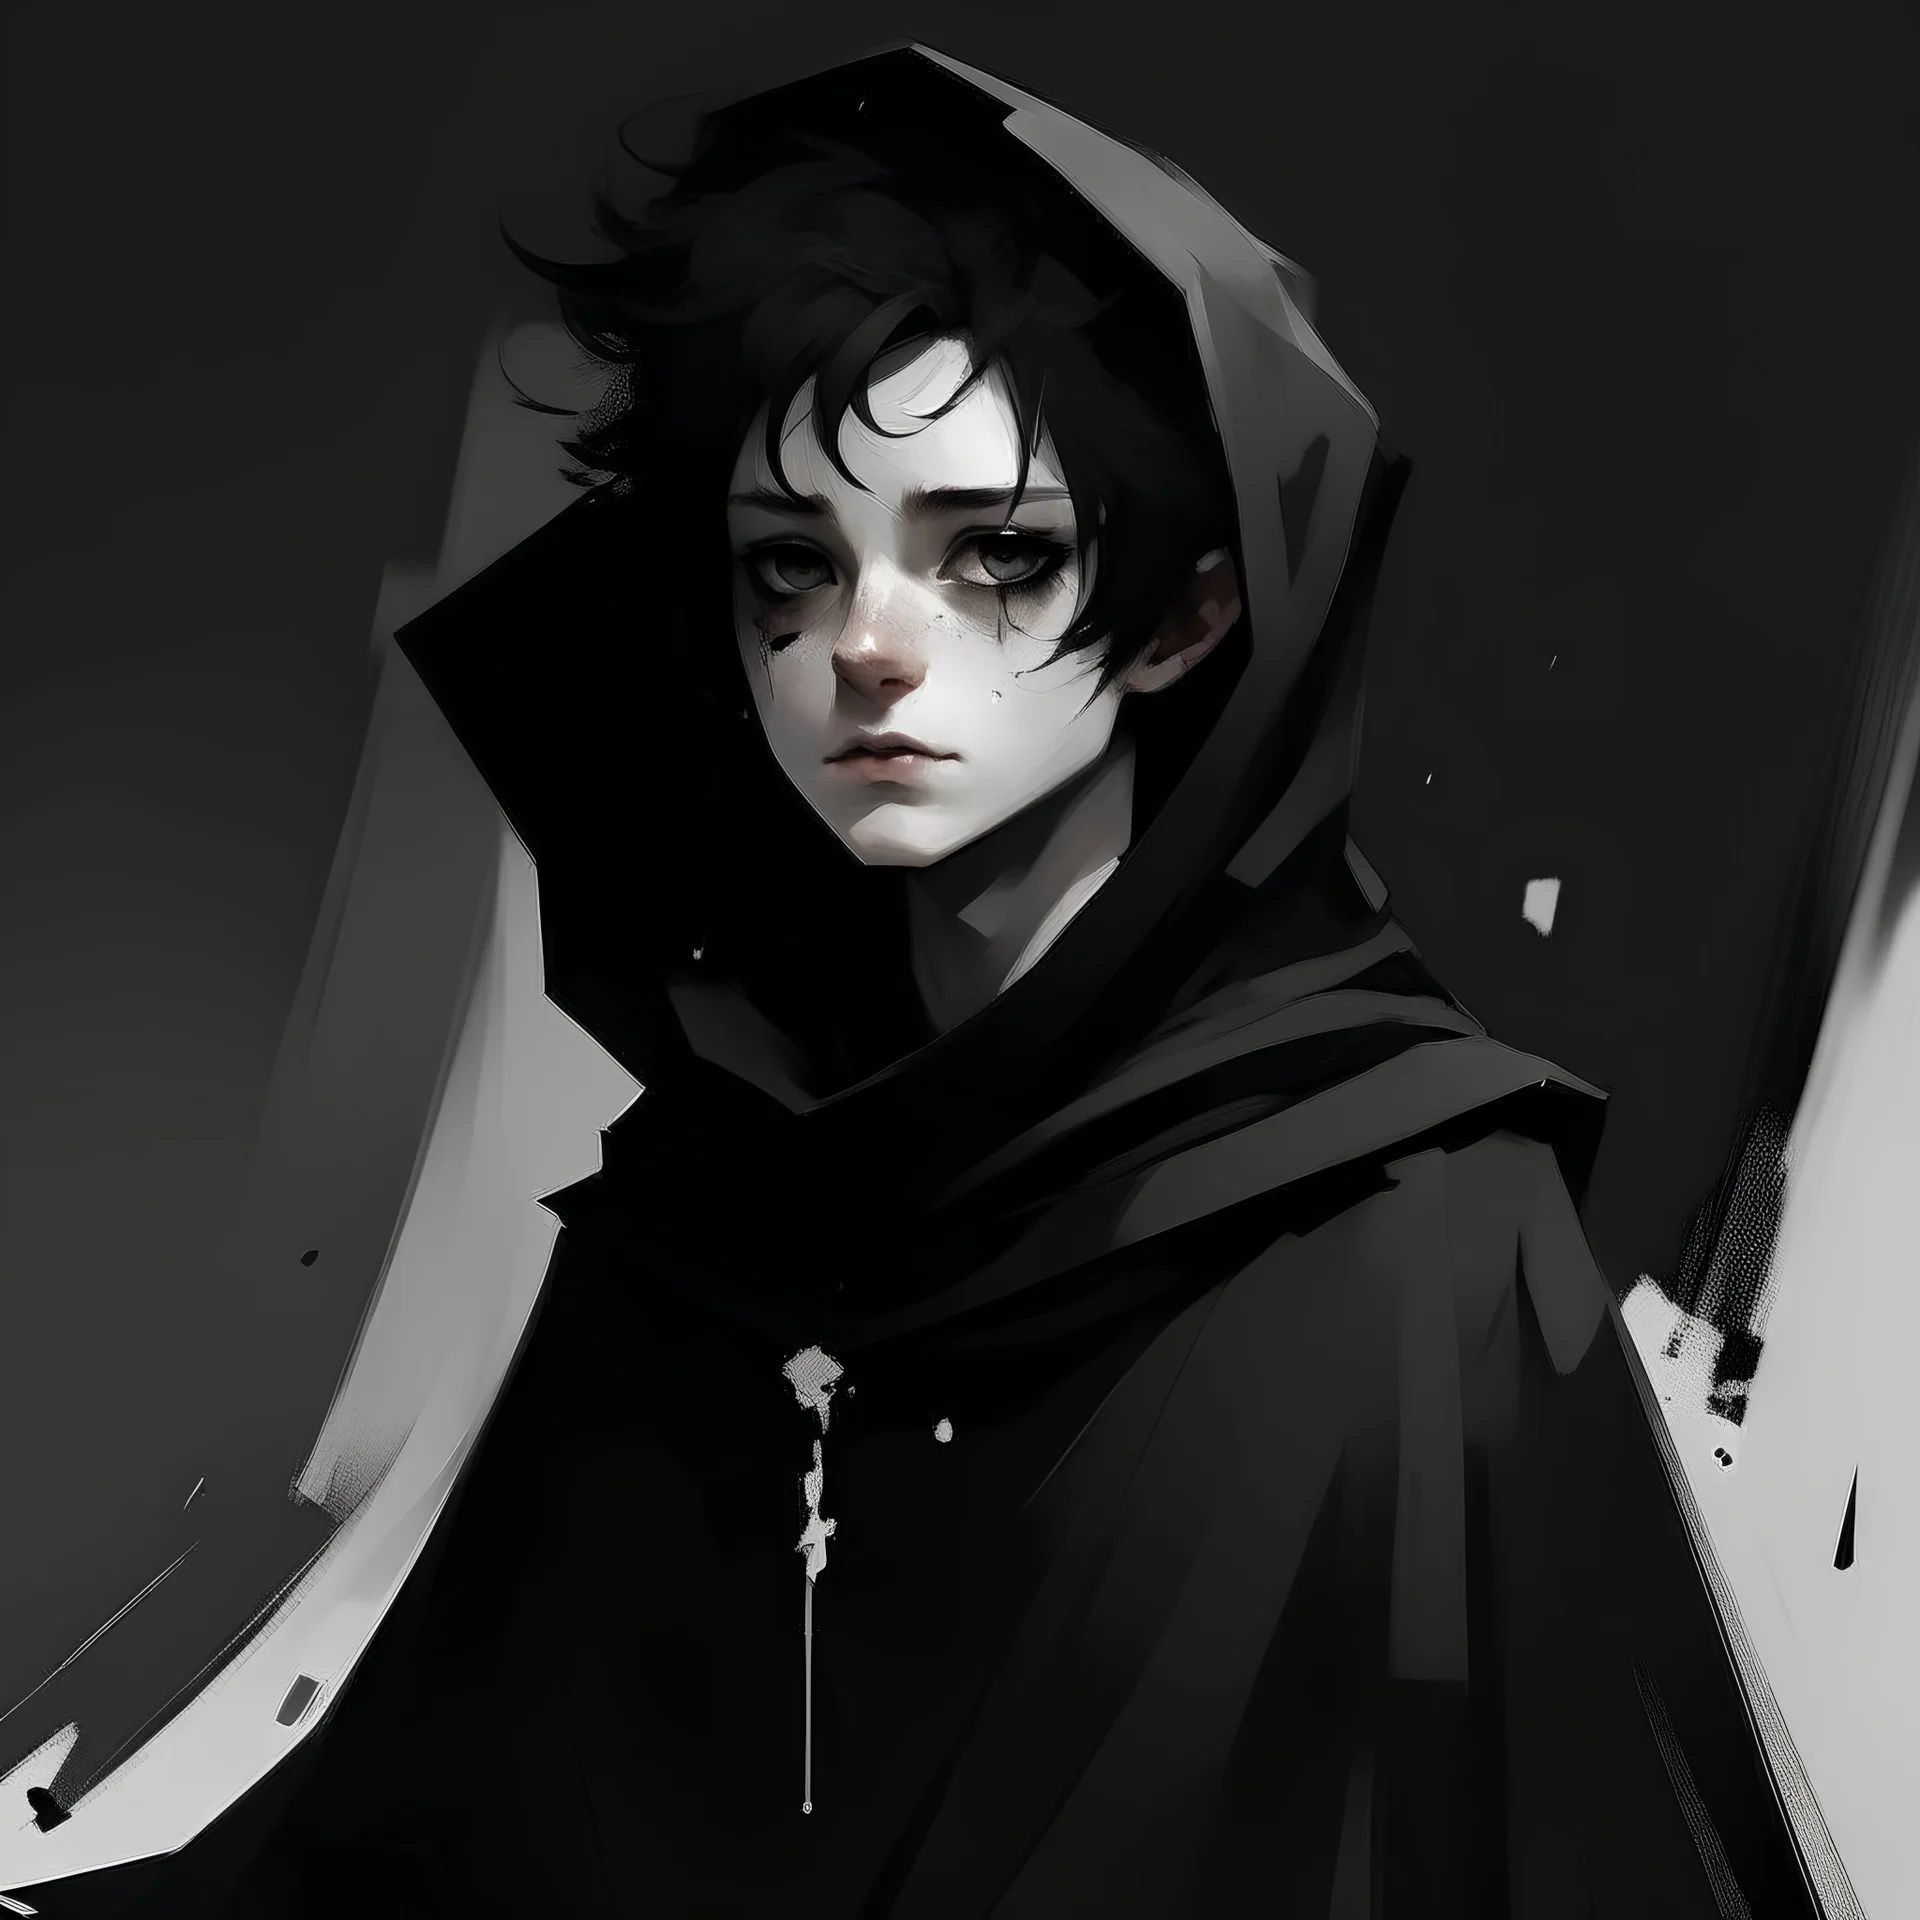 Animated person with white skin, short and messy hair that is black with white streaks through it, wearing black cloak